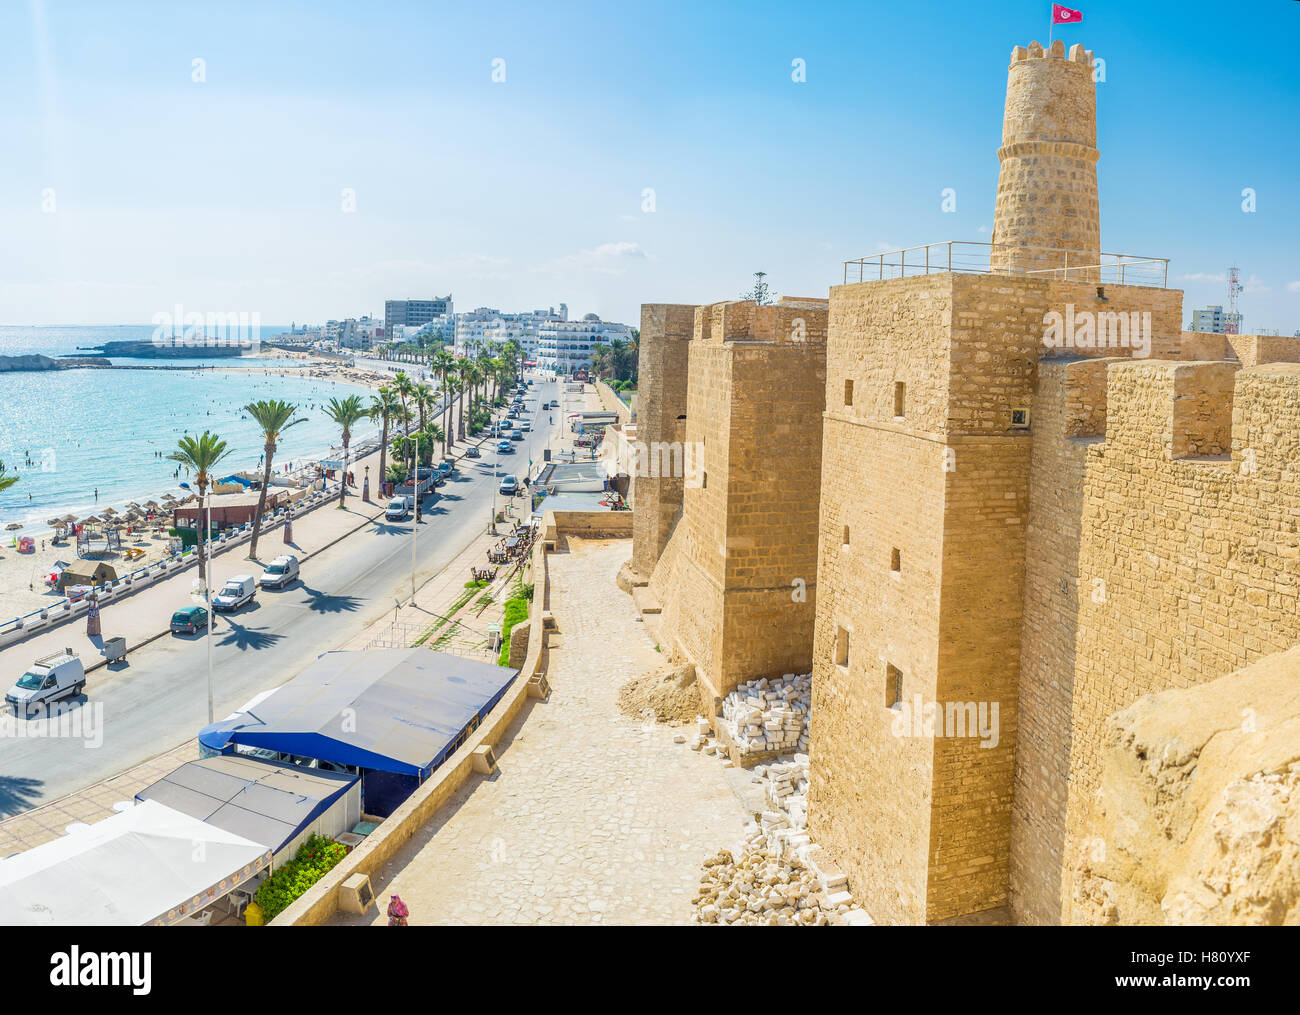 The old defensive fortress overlooks the coastal districts of Monastir, Tunisia. Stock Photo